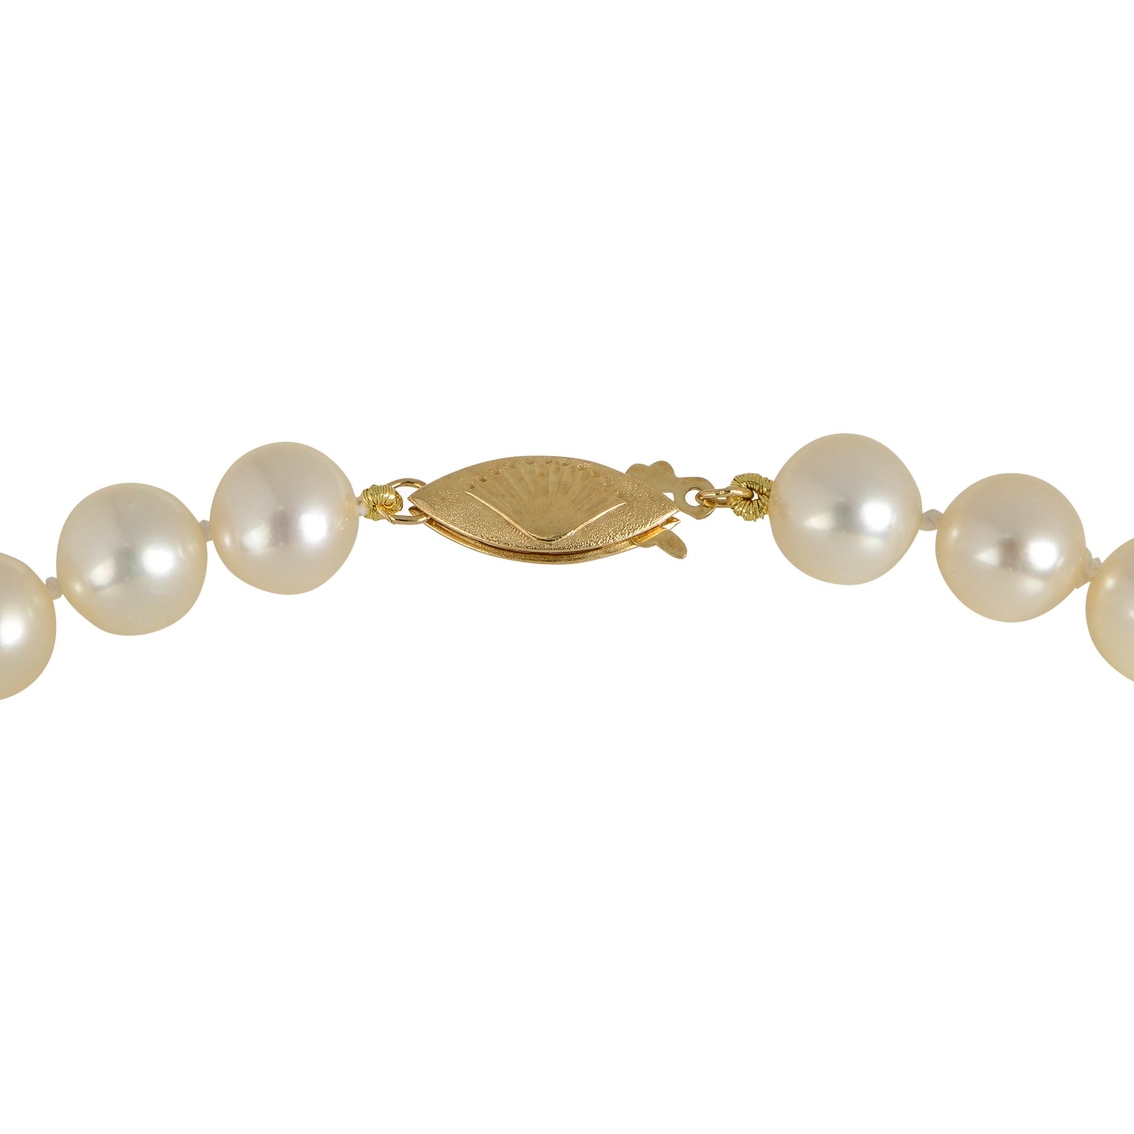 14K Yellow Gold 6-7mm AAA Cultured Freshwater Pearl Bracelet - Image 2 of 2